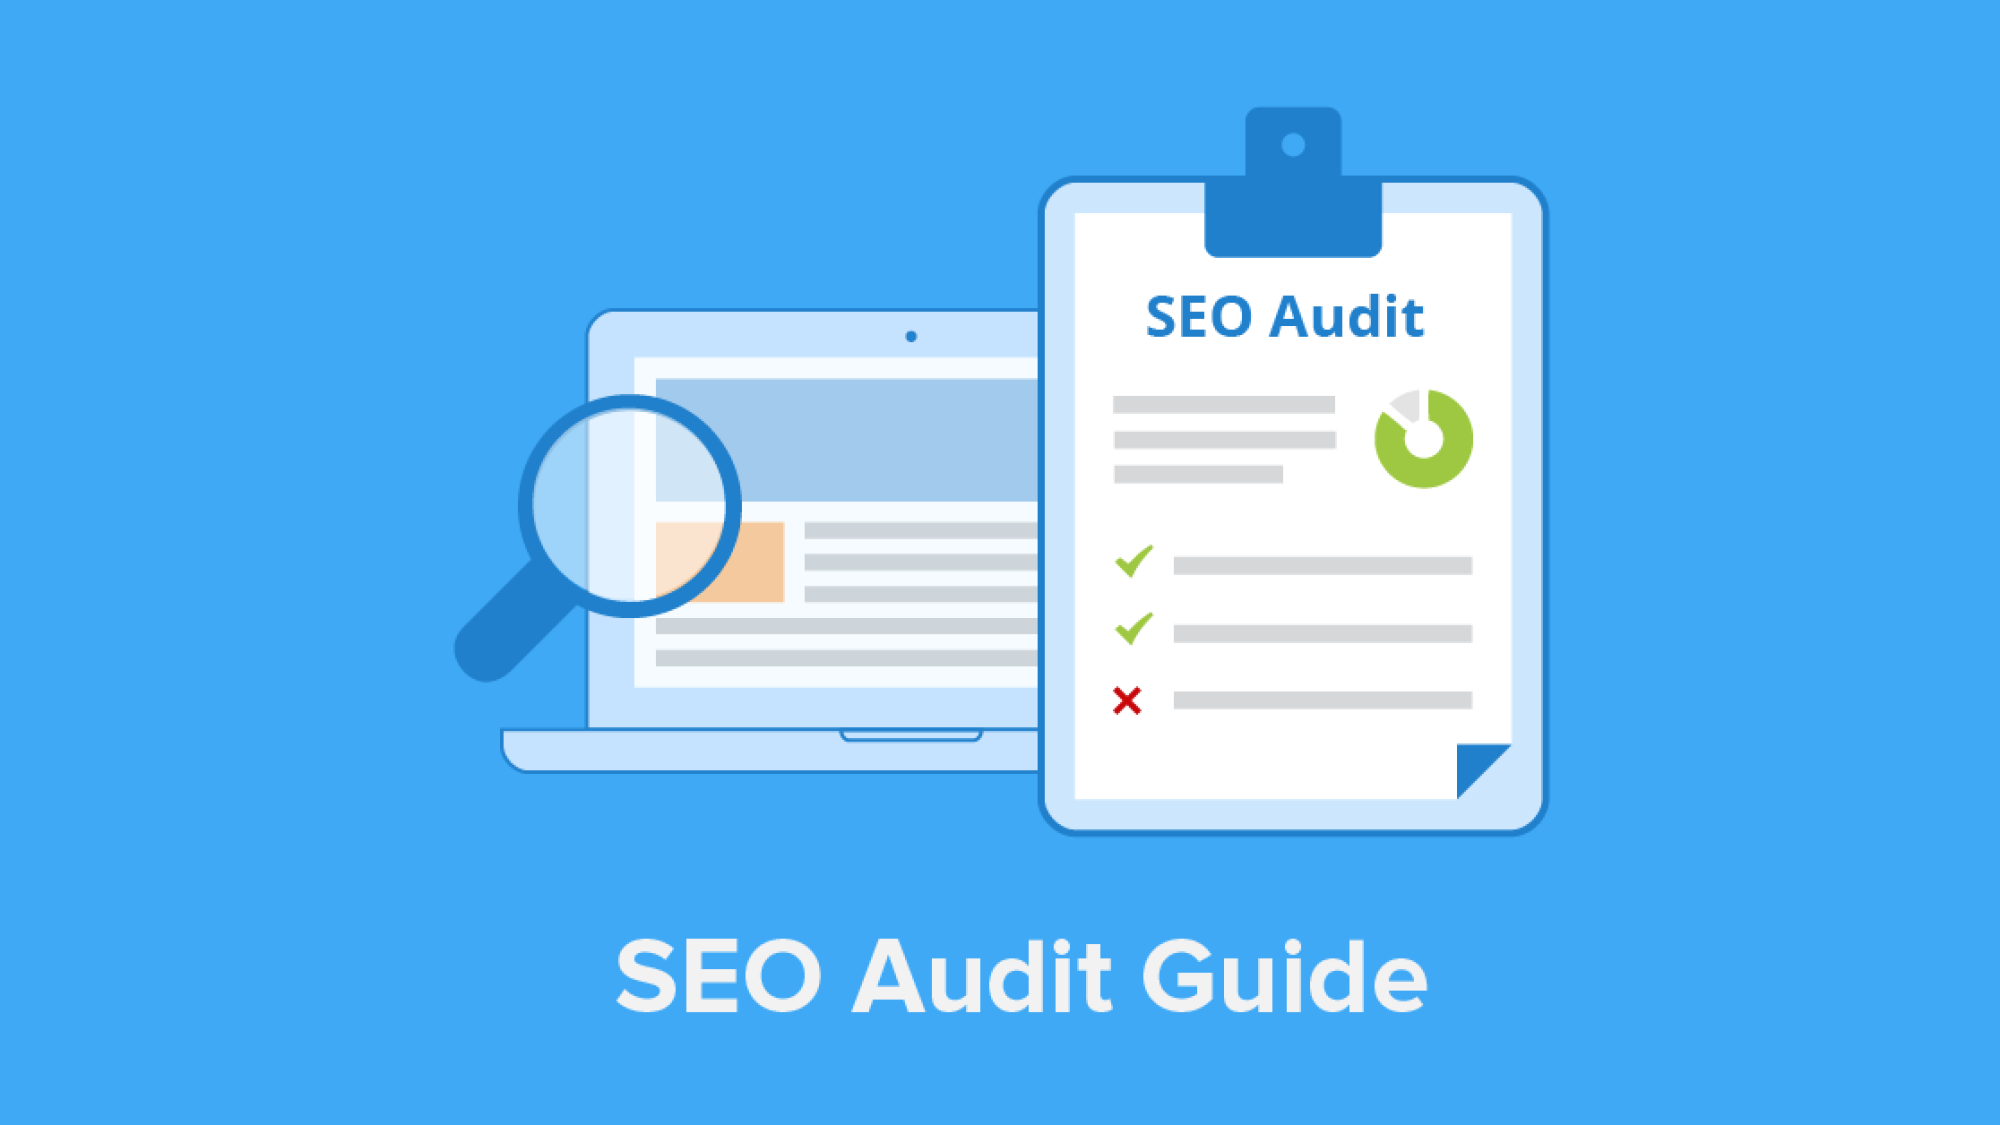 6 STEPS TO AN EFFECTIVE SEO AUDIT